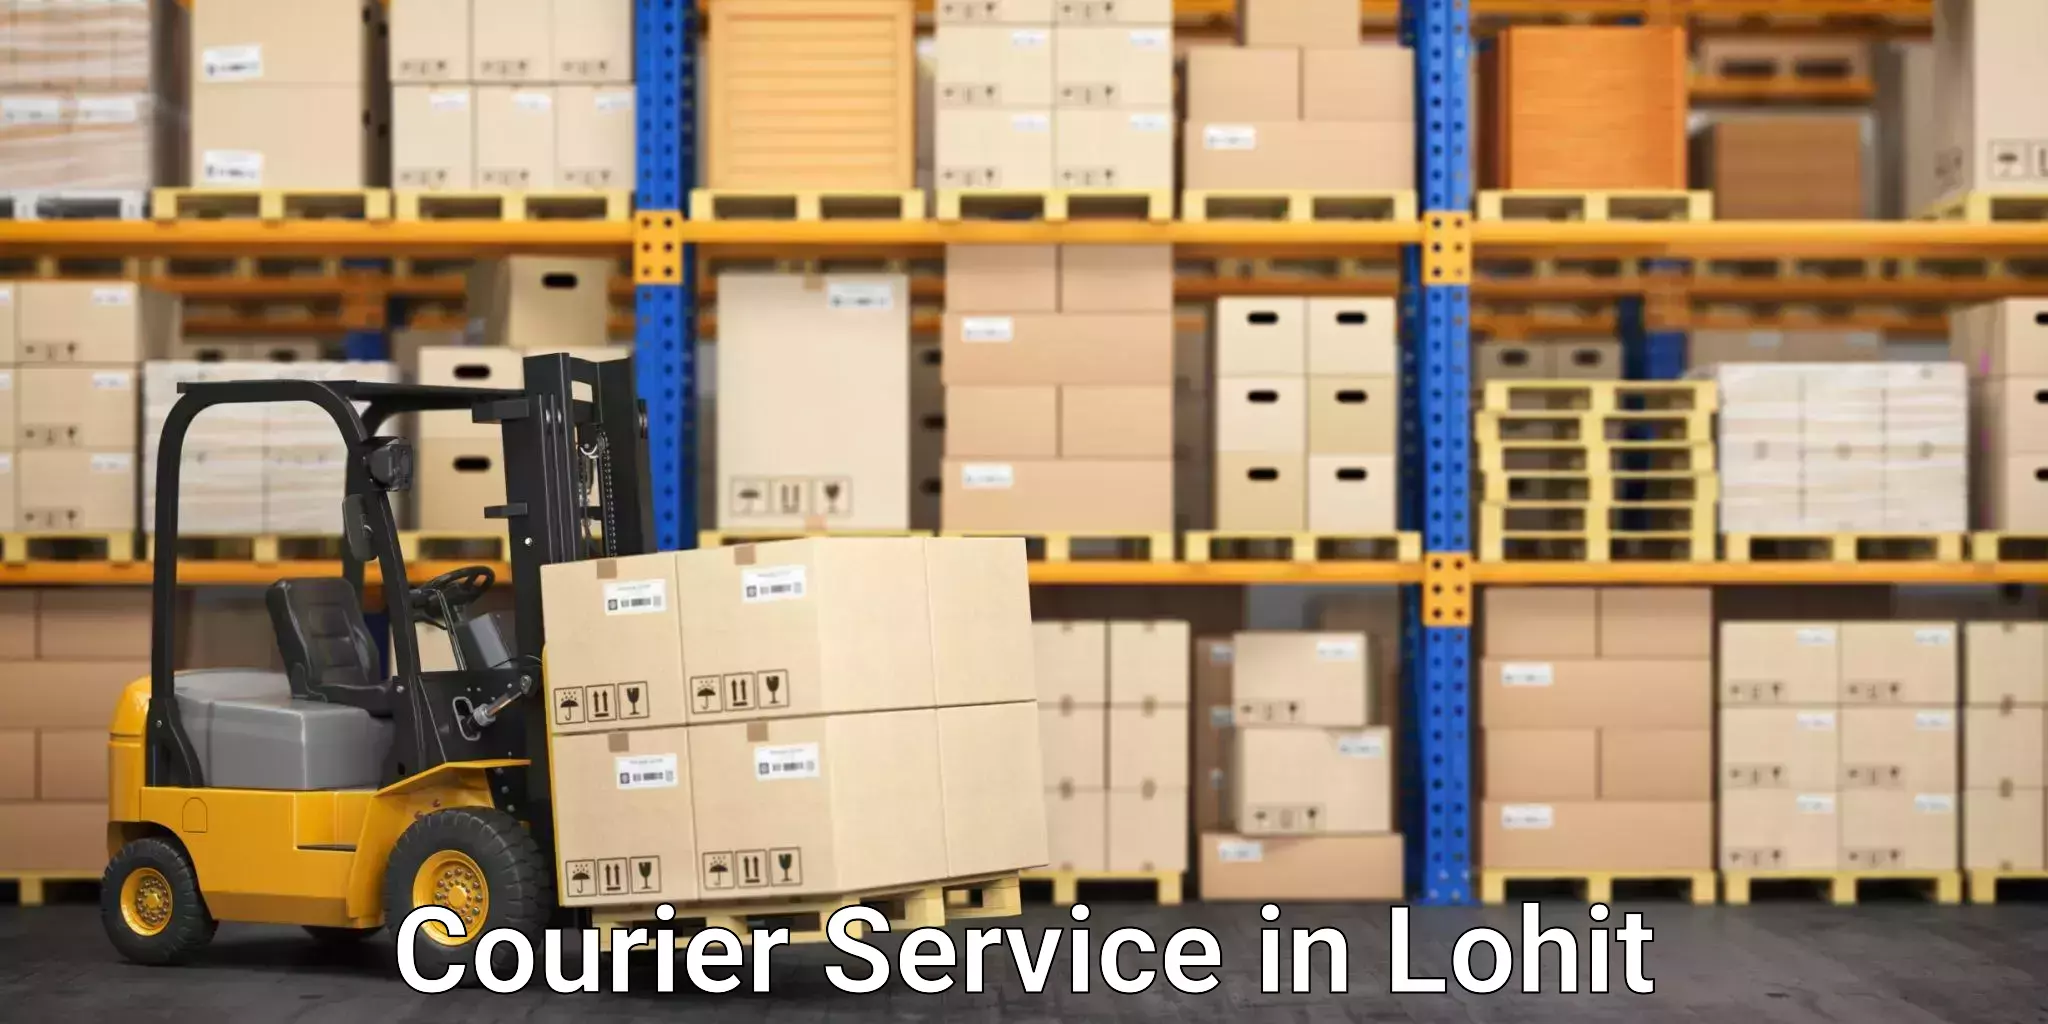 Customer-centric shipping in Lohit